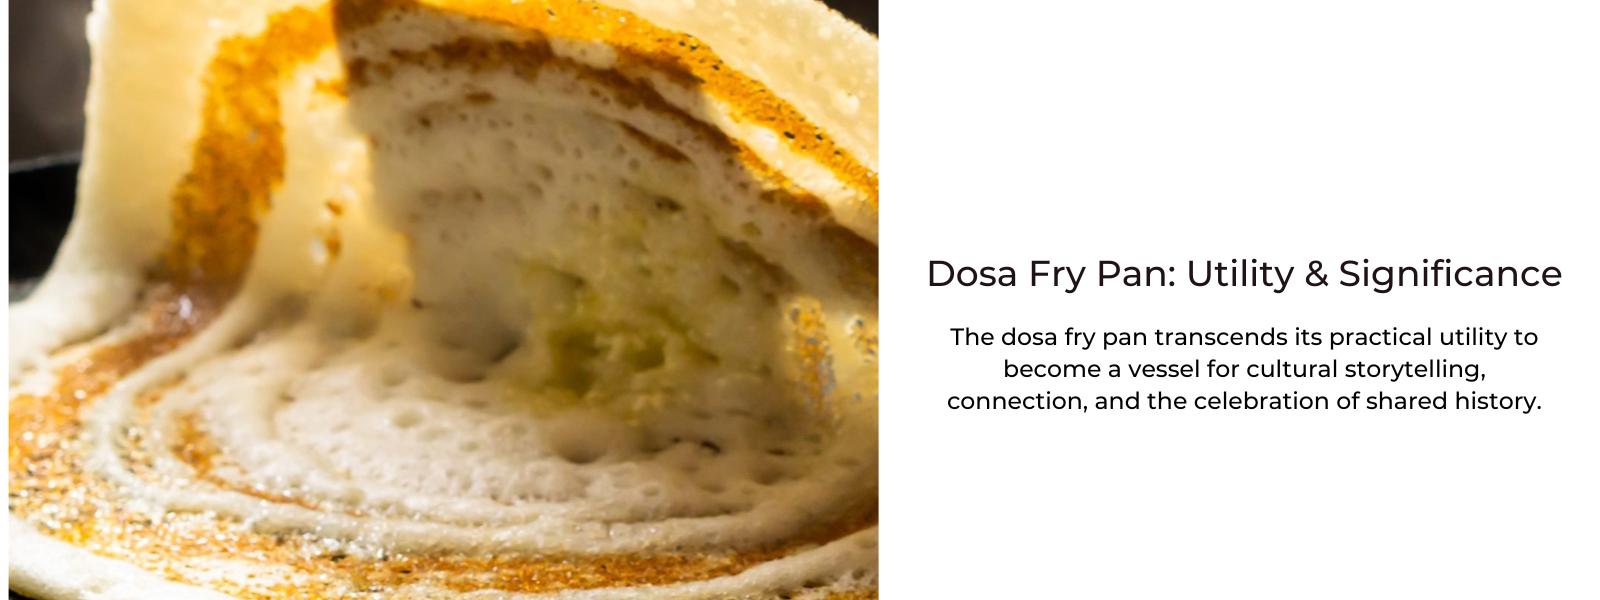 Dosa Fry Pan: Utility & Significance